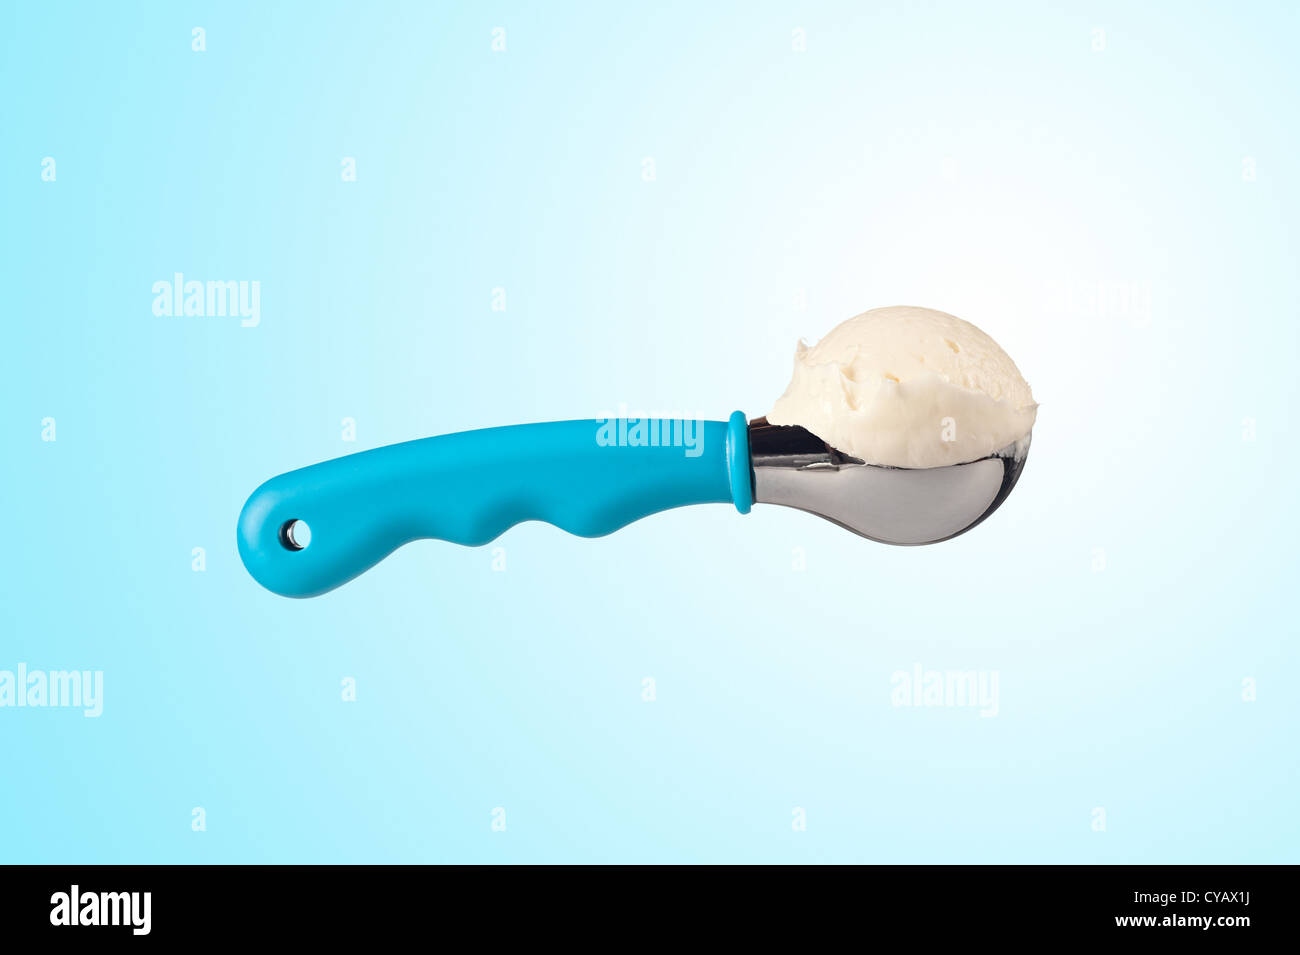 A delicious scoop of ice cream against a decorative blue and white background. Stock Photo